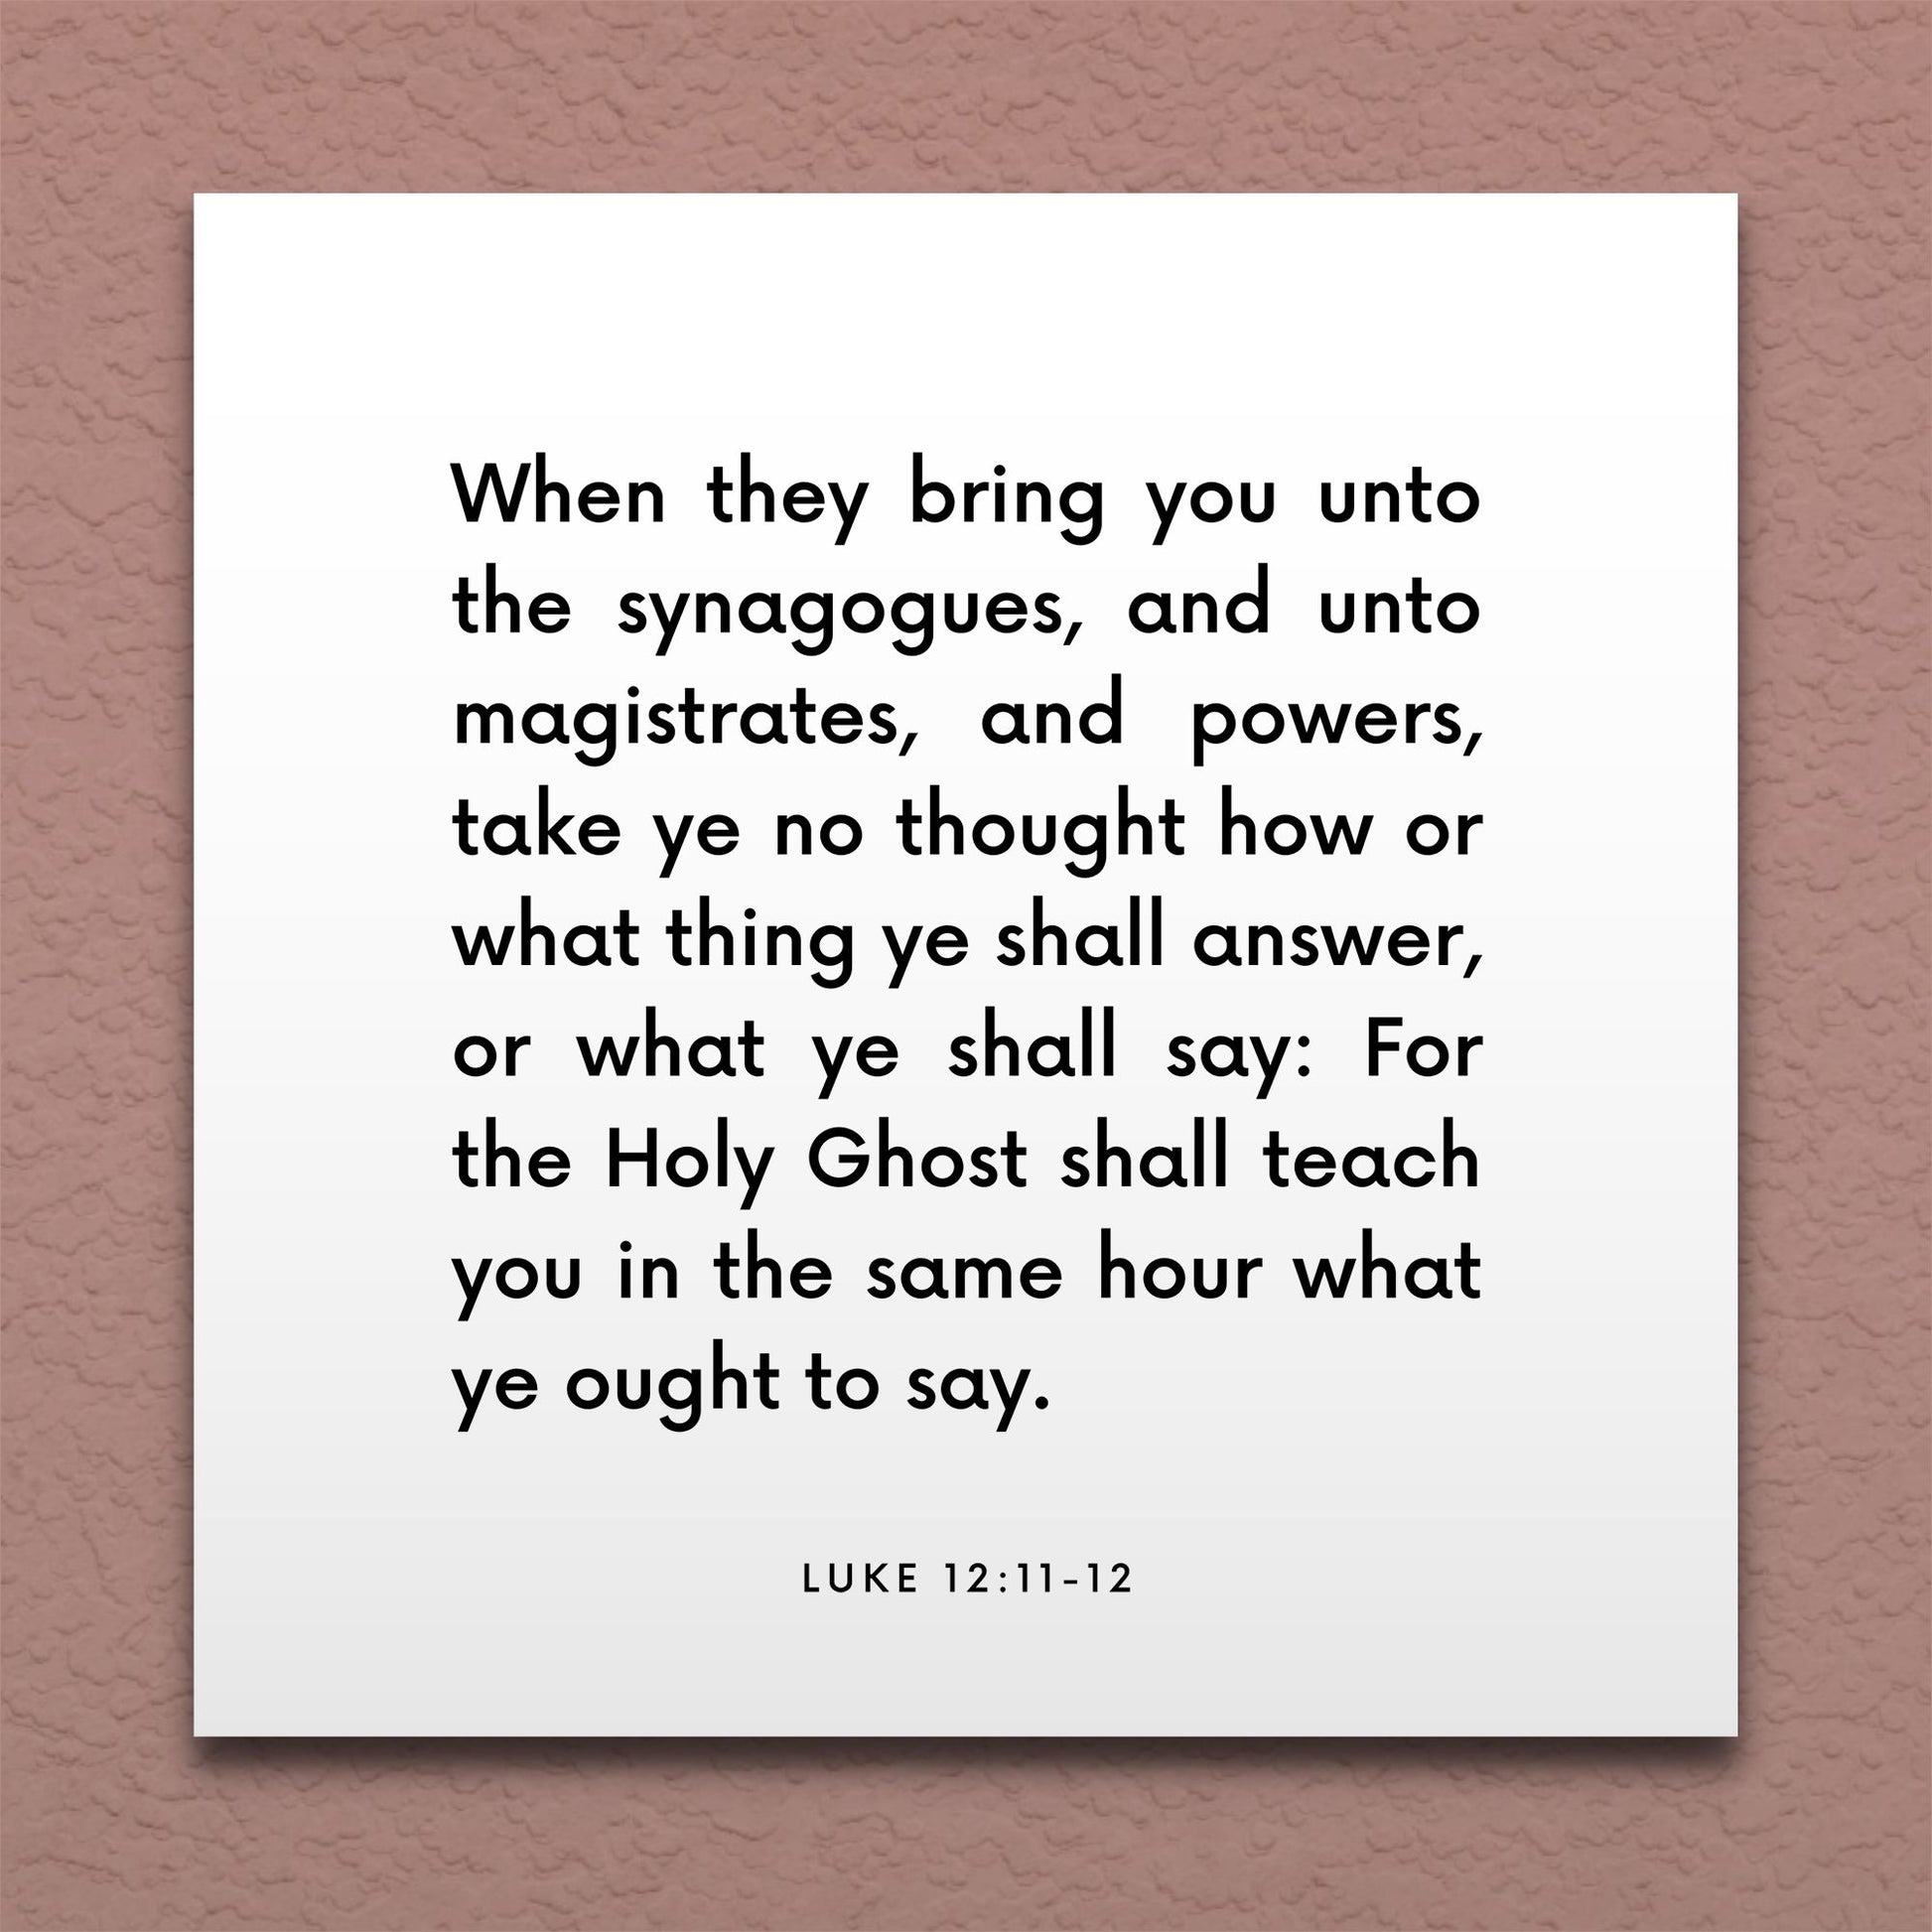 Wall-mounted scripture tile for Luke 12:11-12 - "The Holy Ghost shall teach you what he ought to say"